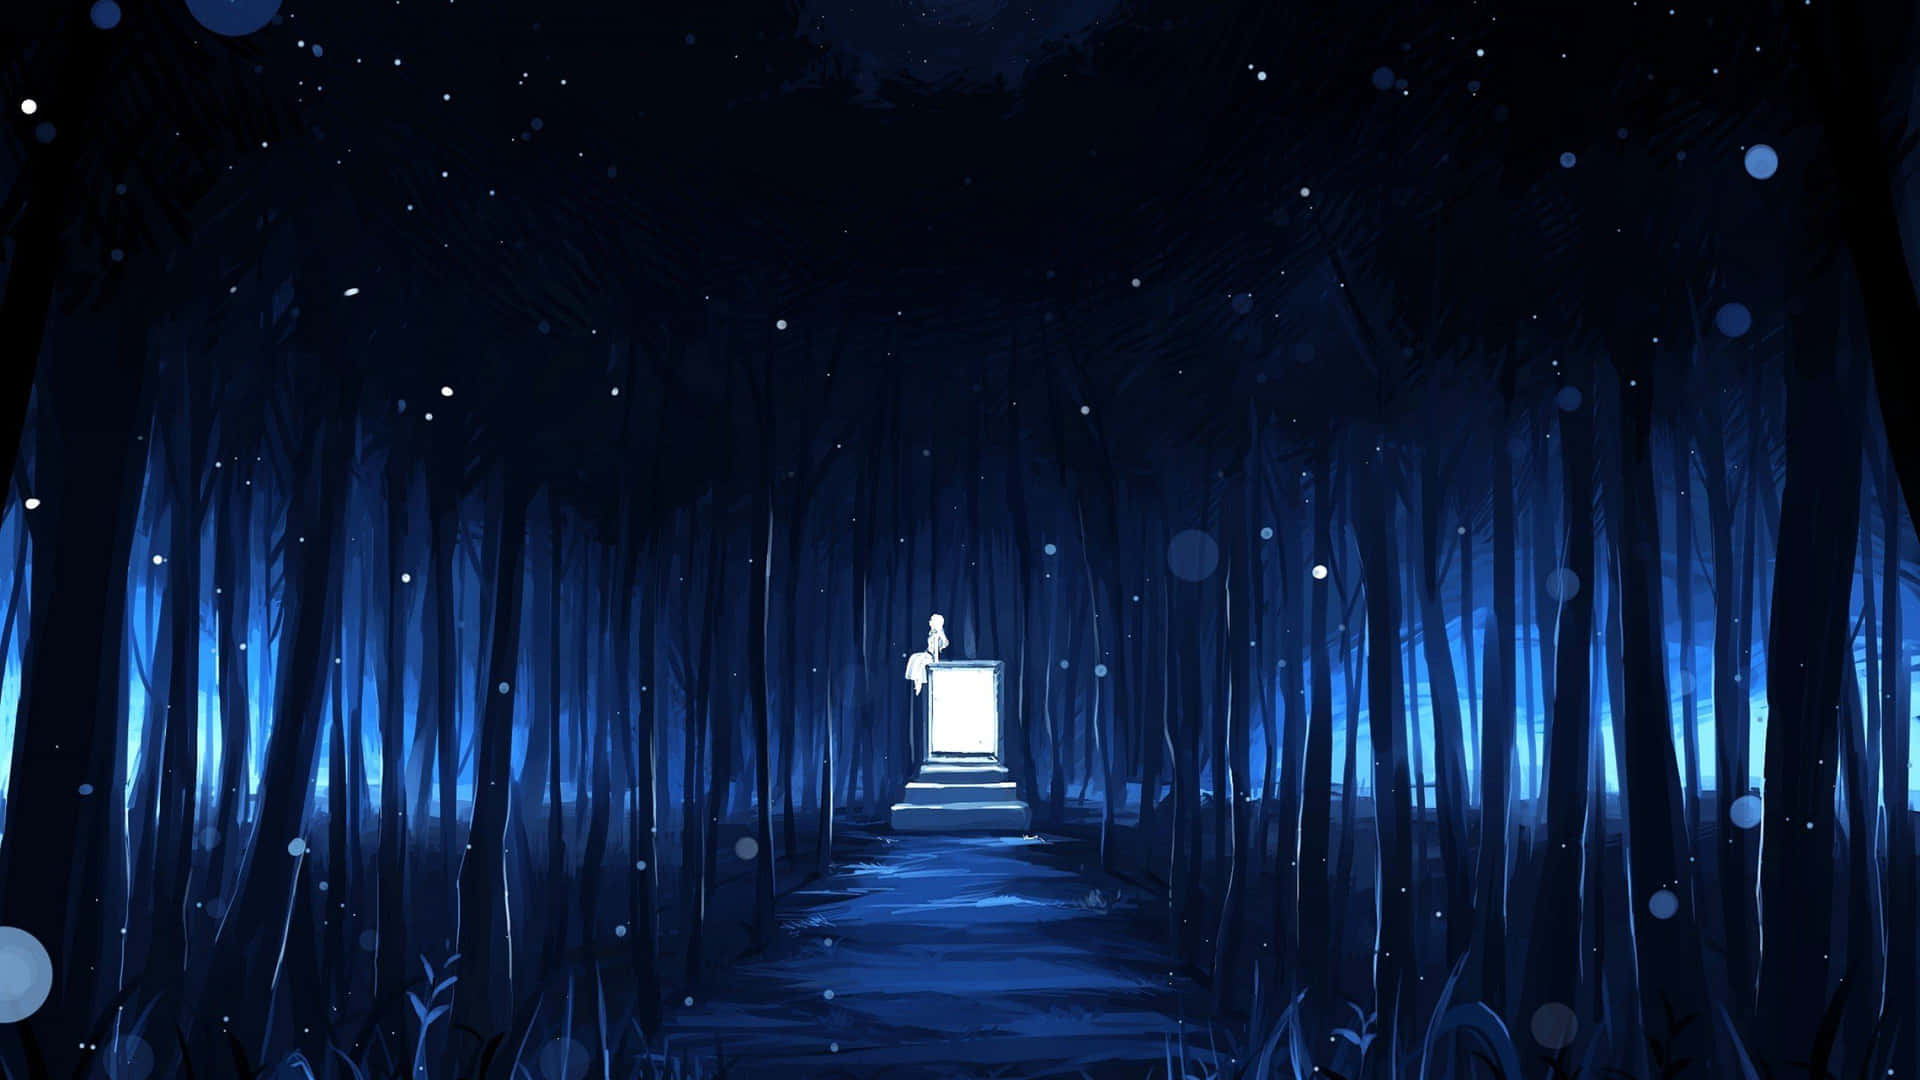 4595856 fantasy art plants flowers stars life nature anime forest  artwork  Rare Gallery HD Wallpapers